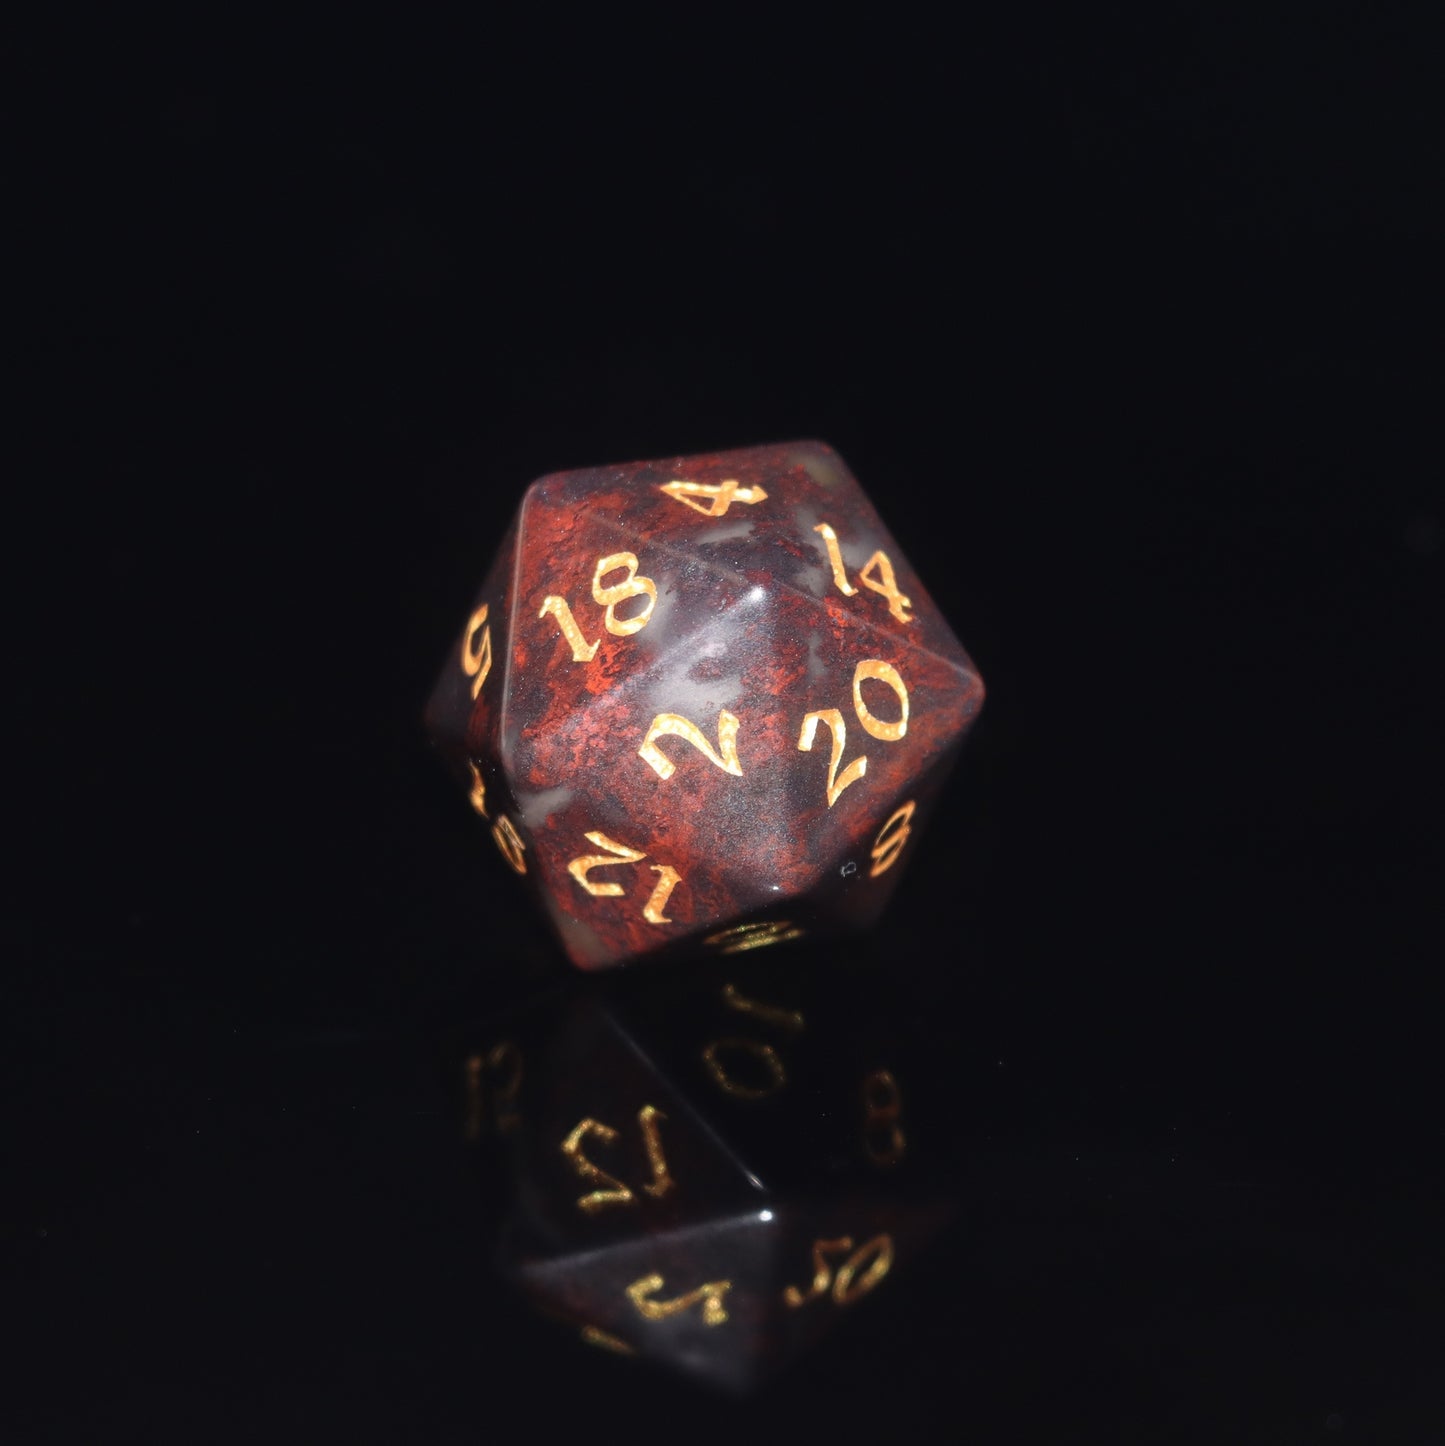 MAGISEVEN Natural Chicken Blood Stone DND DICE Set for TTRPG, Role playing, Pathfinder, MTG, ASMR cosplay